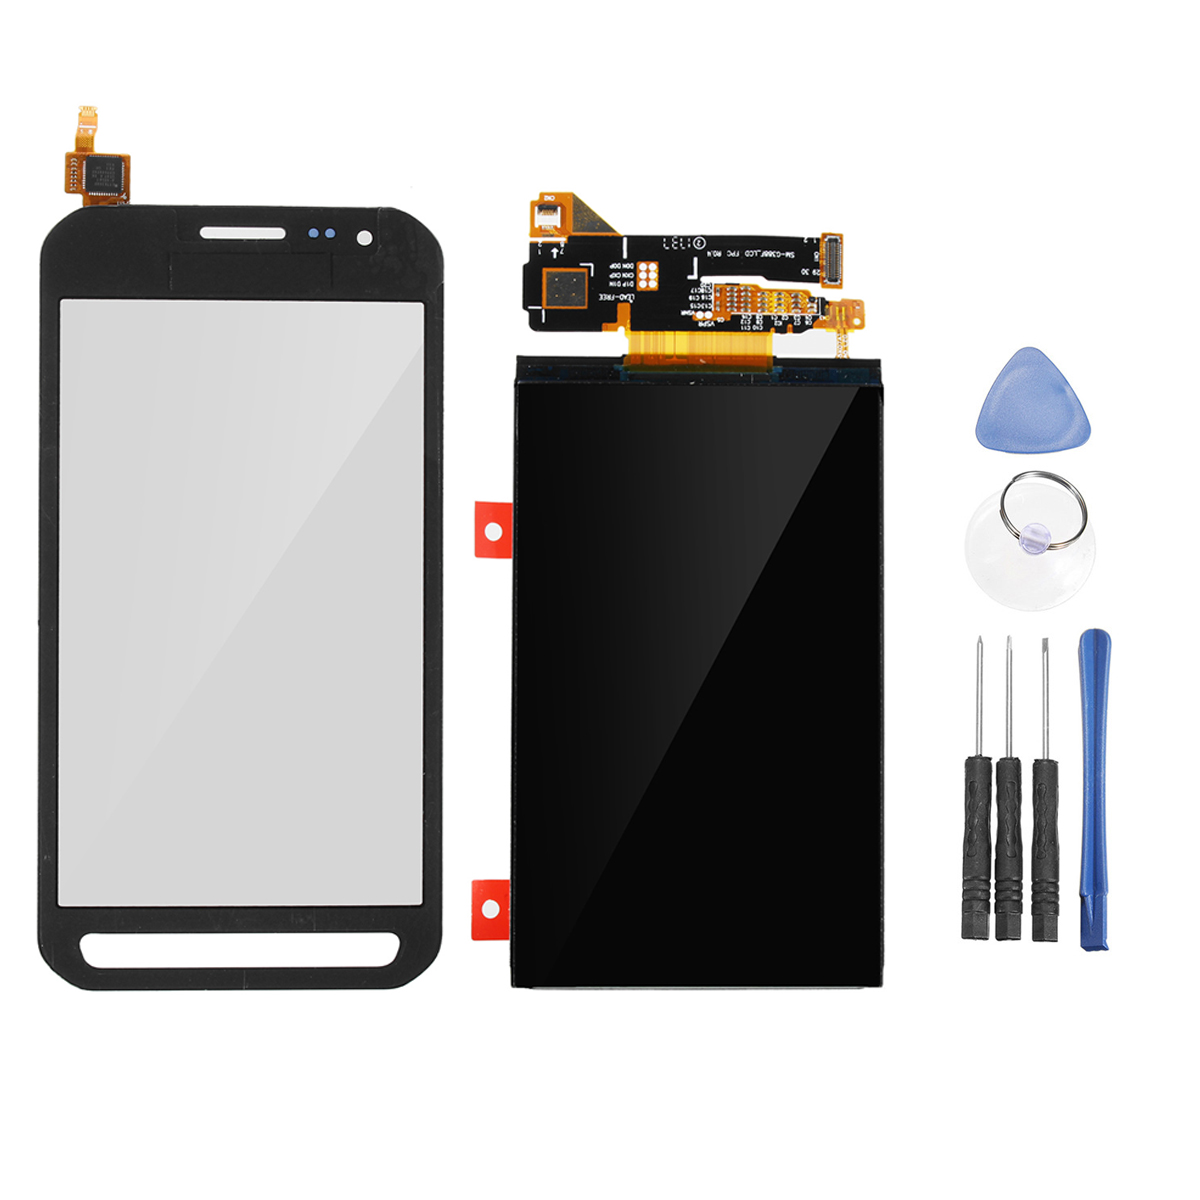 

LCD Touch Screen Digitizer Assembly + Repair Tools for Samsung Galaxy Xcover 3 SM-G388F